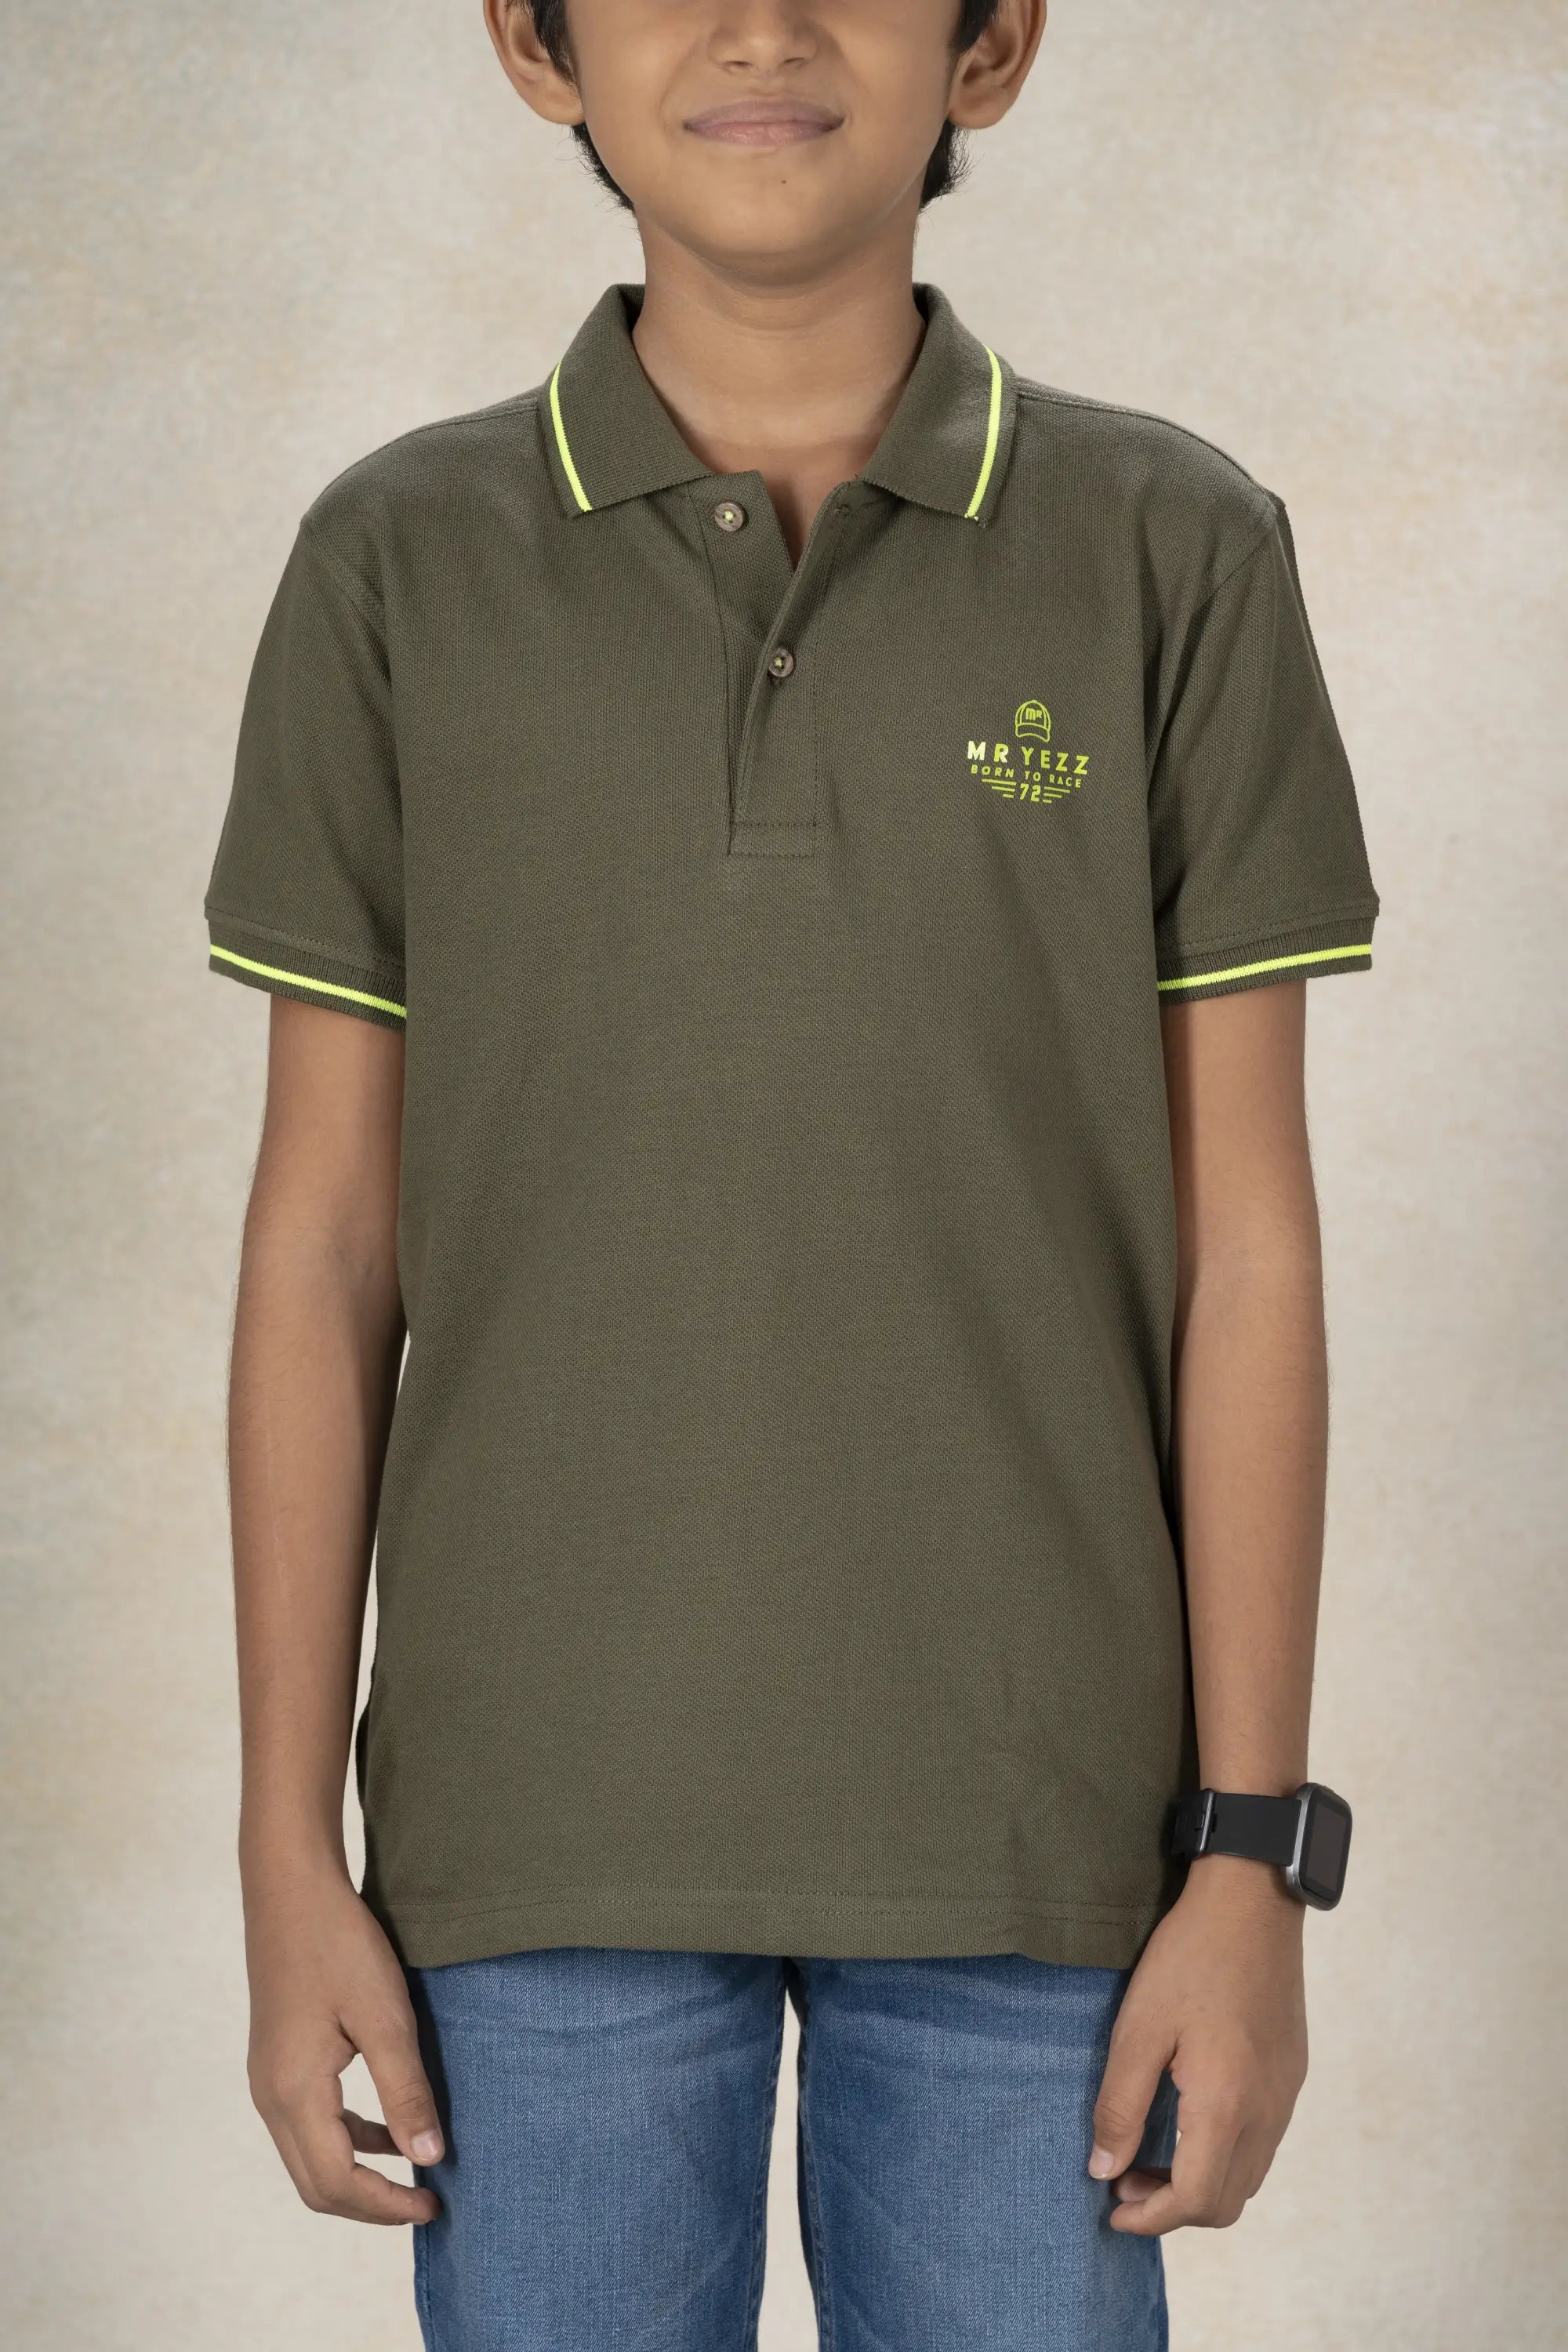 Boys Polo with Back Print T-Shirt MR YEZZ #color_Dusty Army